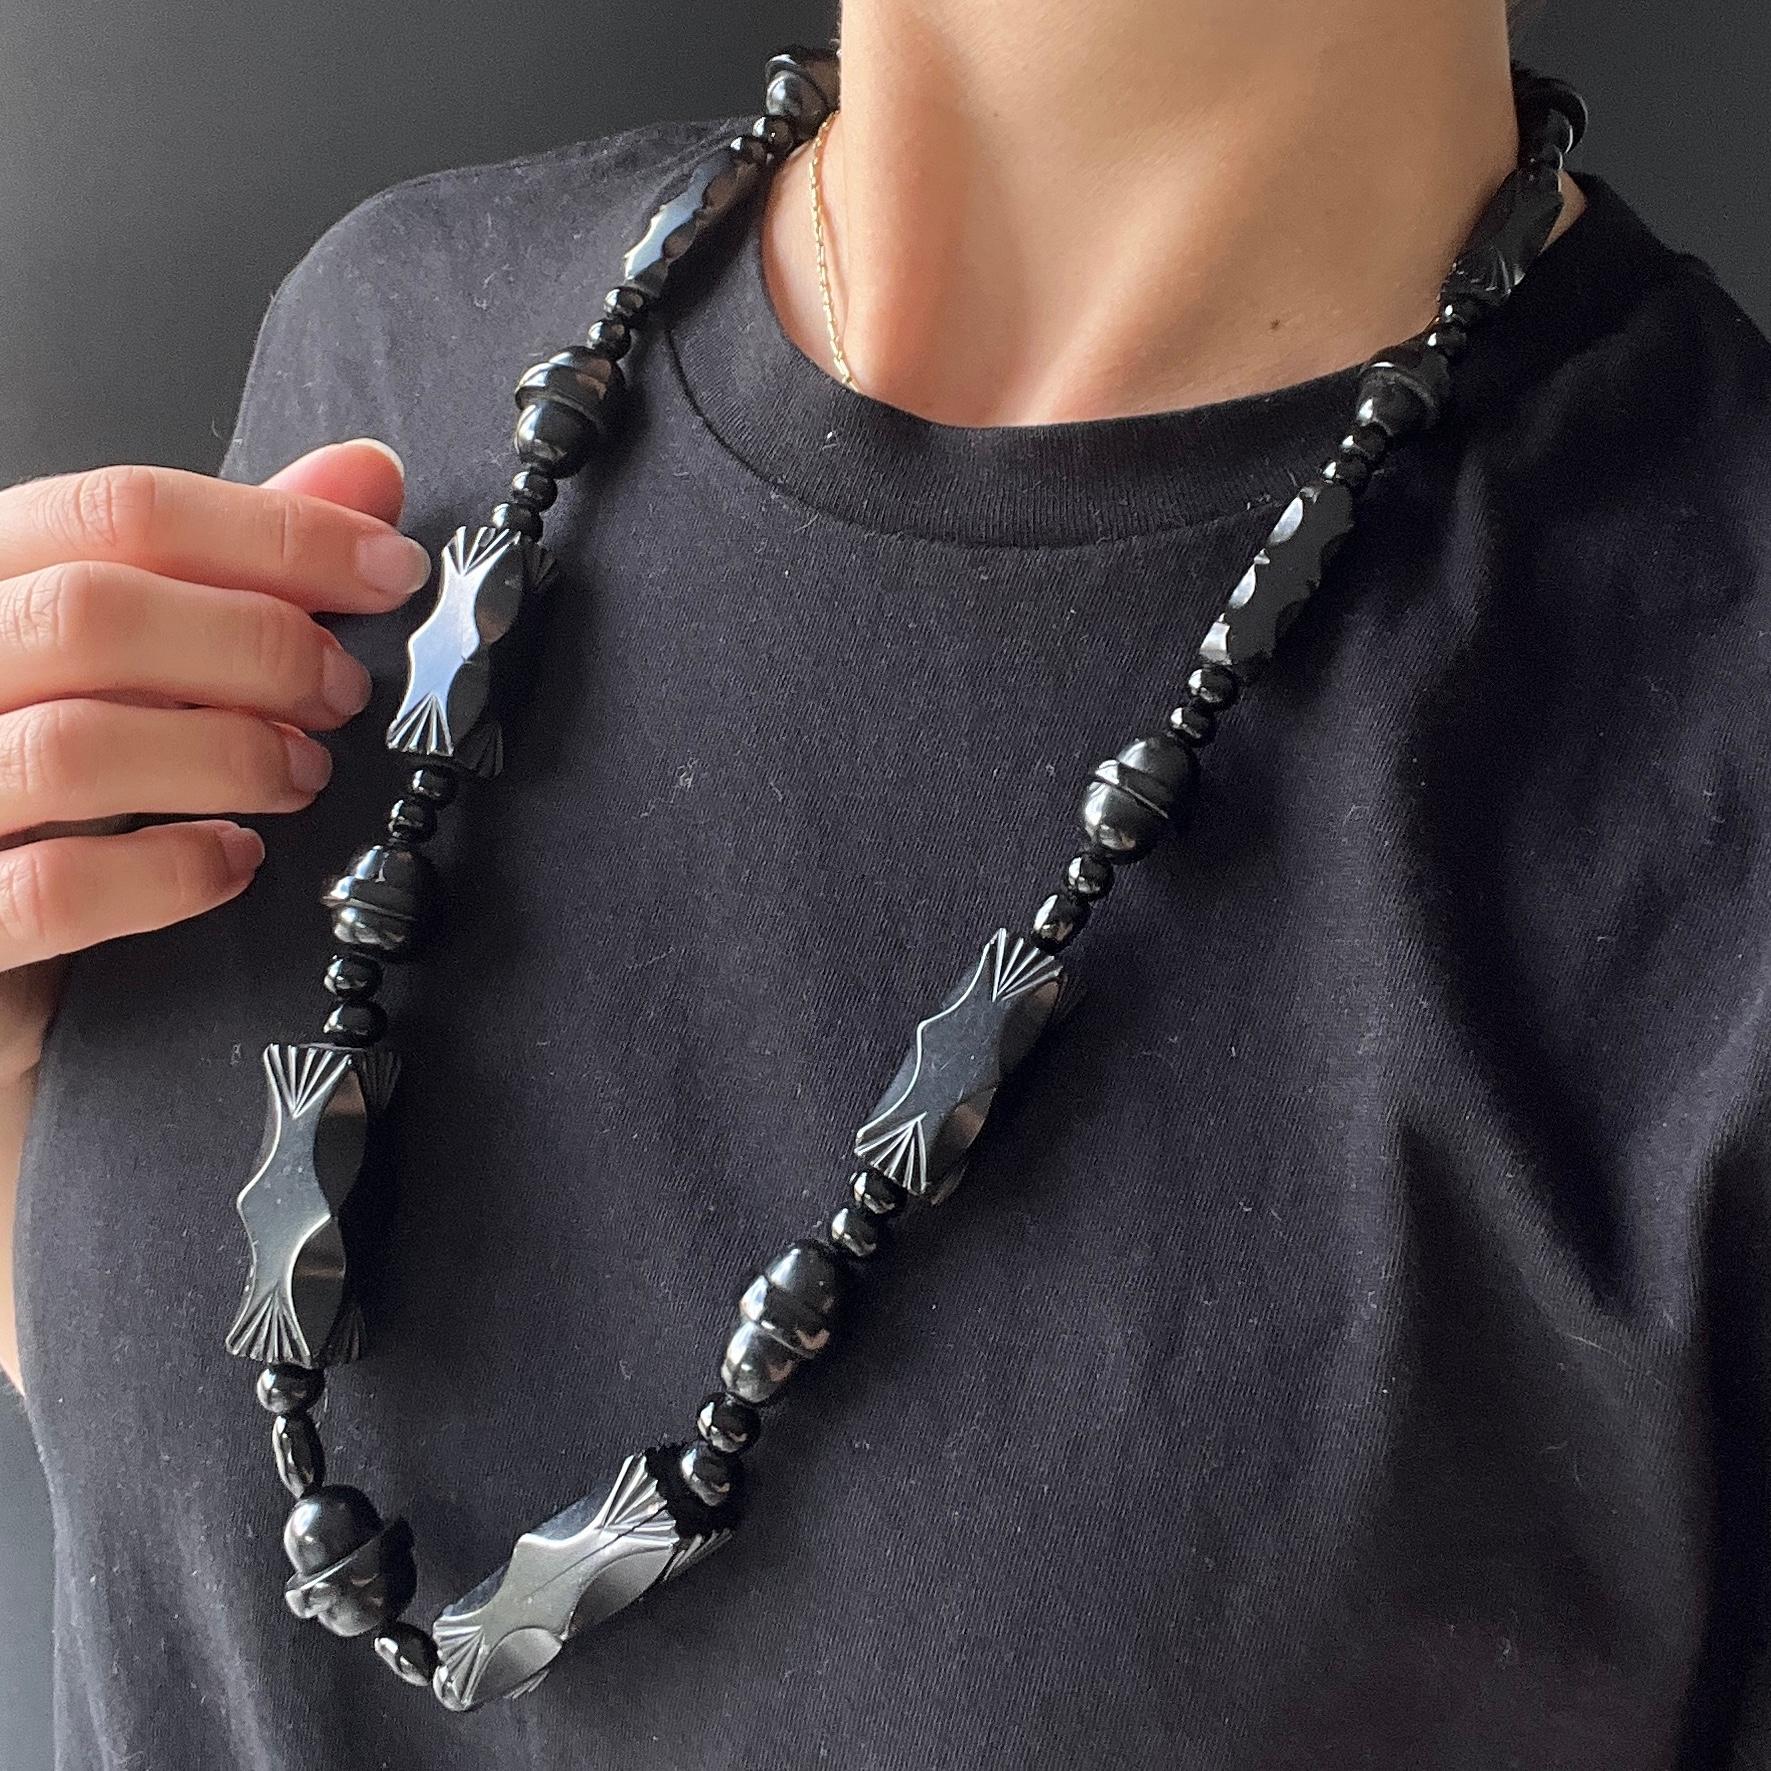 This stunning chunky necklace is a complete loop and does not have a clasp. The beads graduate in size, starting large at the centre and the smallest on the outer edges. 

Length: 70cm 
Largest Bead Dimensions: 42x16mm
Smallest Bead Dimensions: